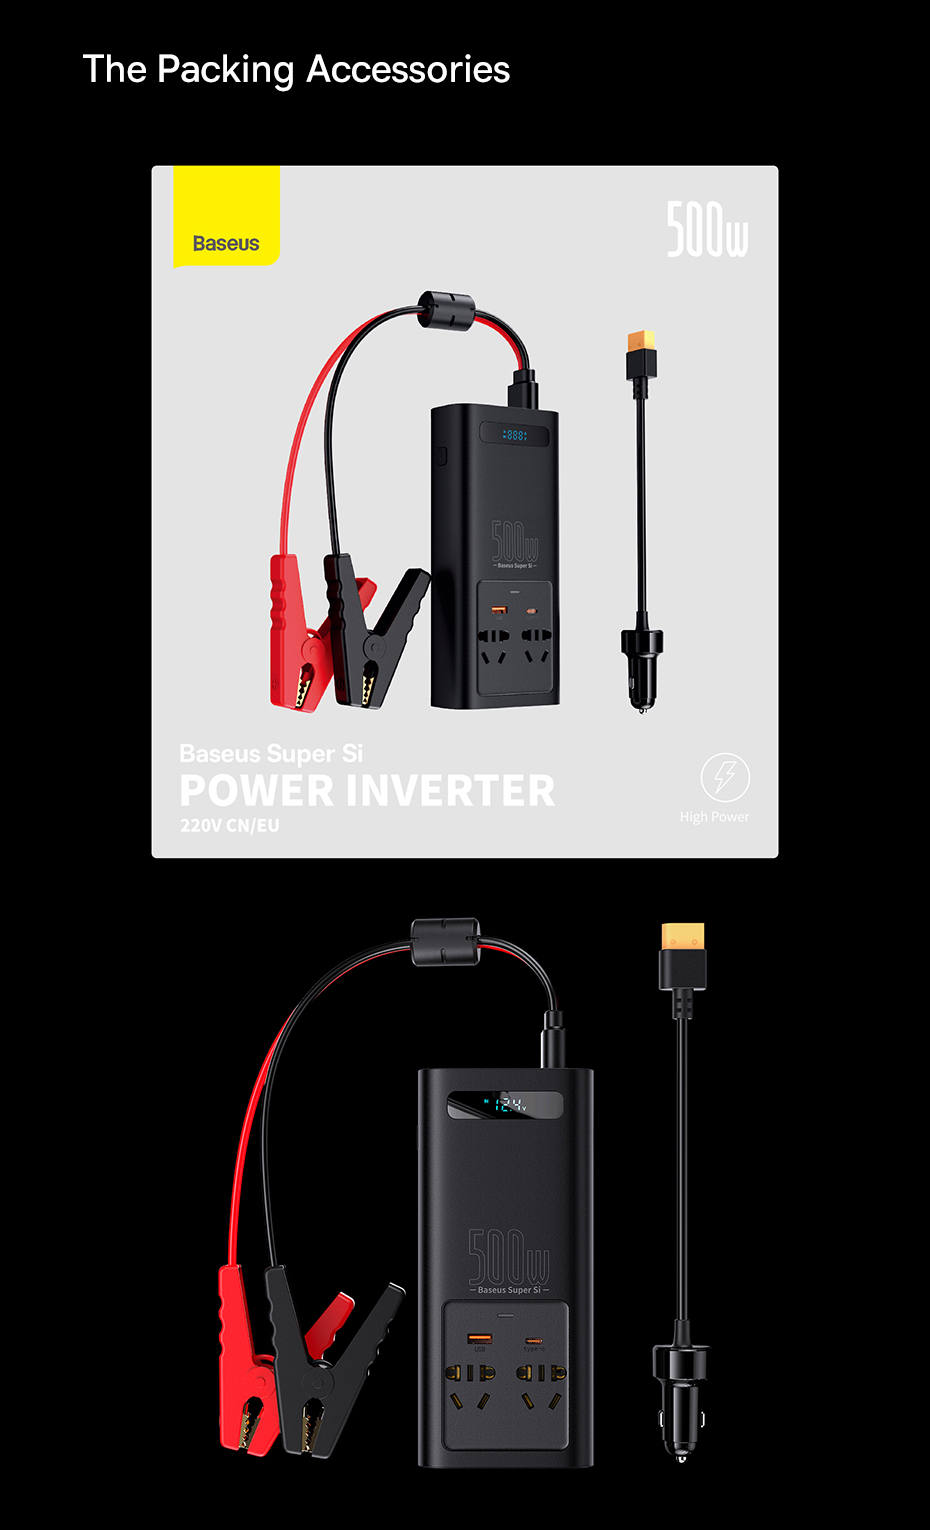 Baseus Super Si Power Inverter 500W 12V to 220V Pure Sine Wave with AC & USB & Type-C 4 Ports Output Car Charger Voltage Booster